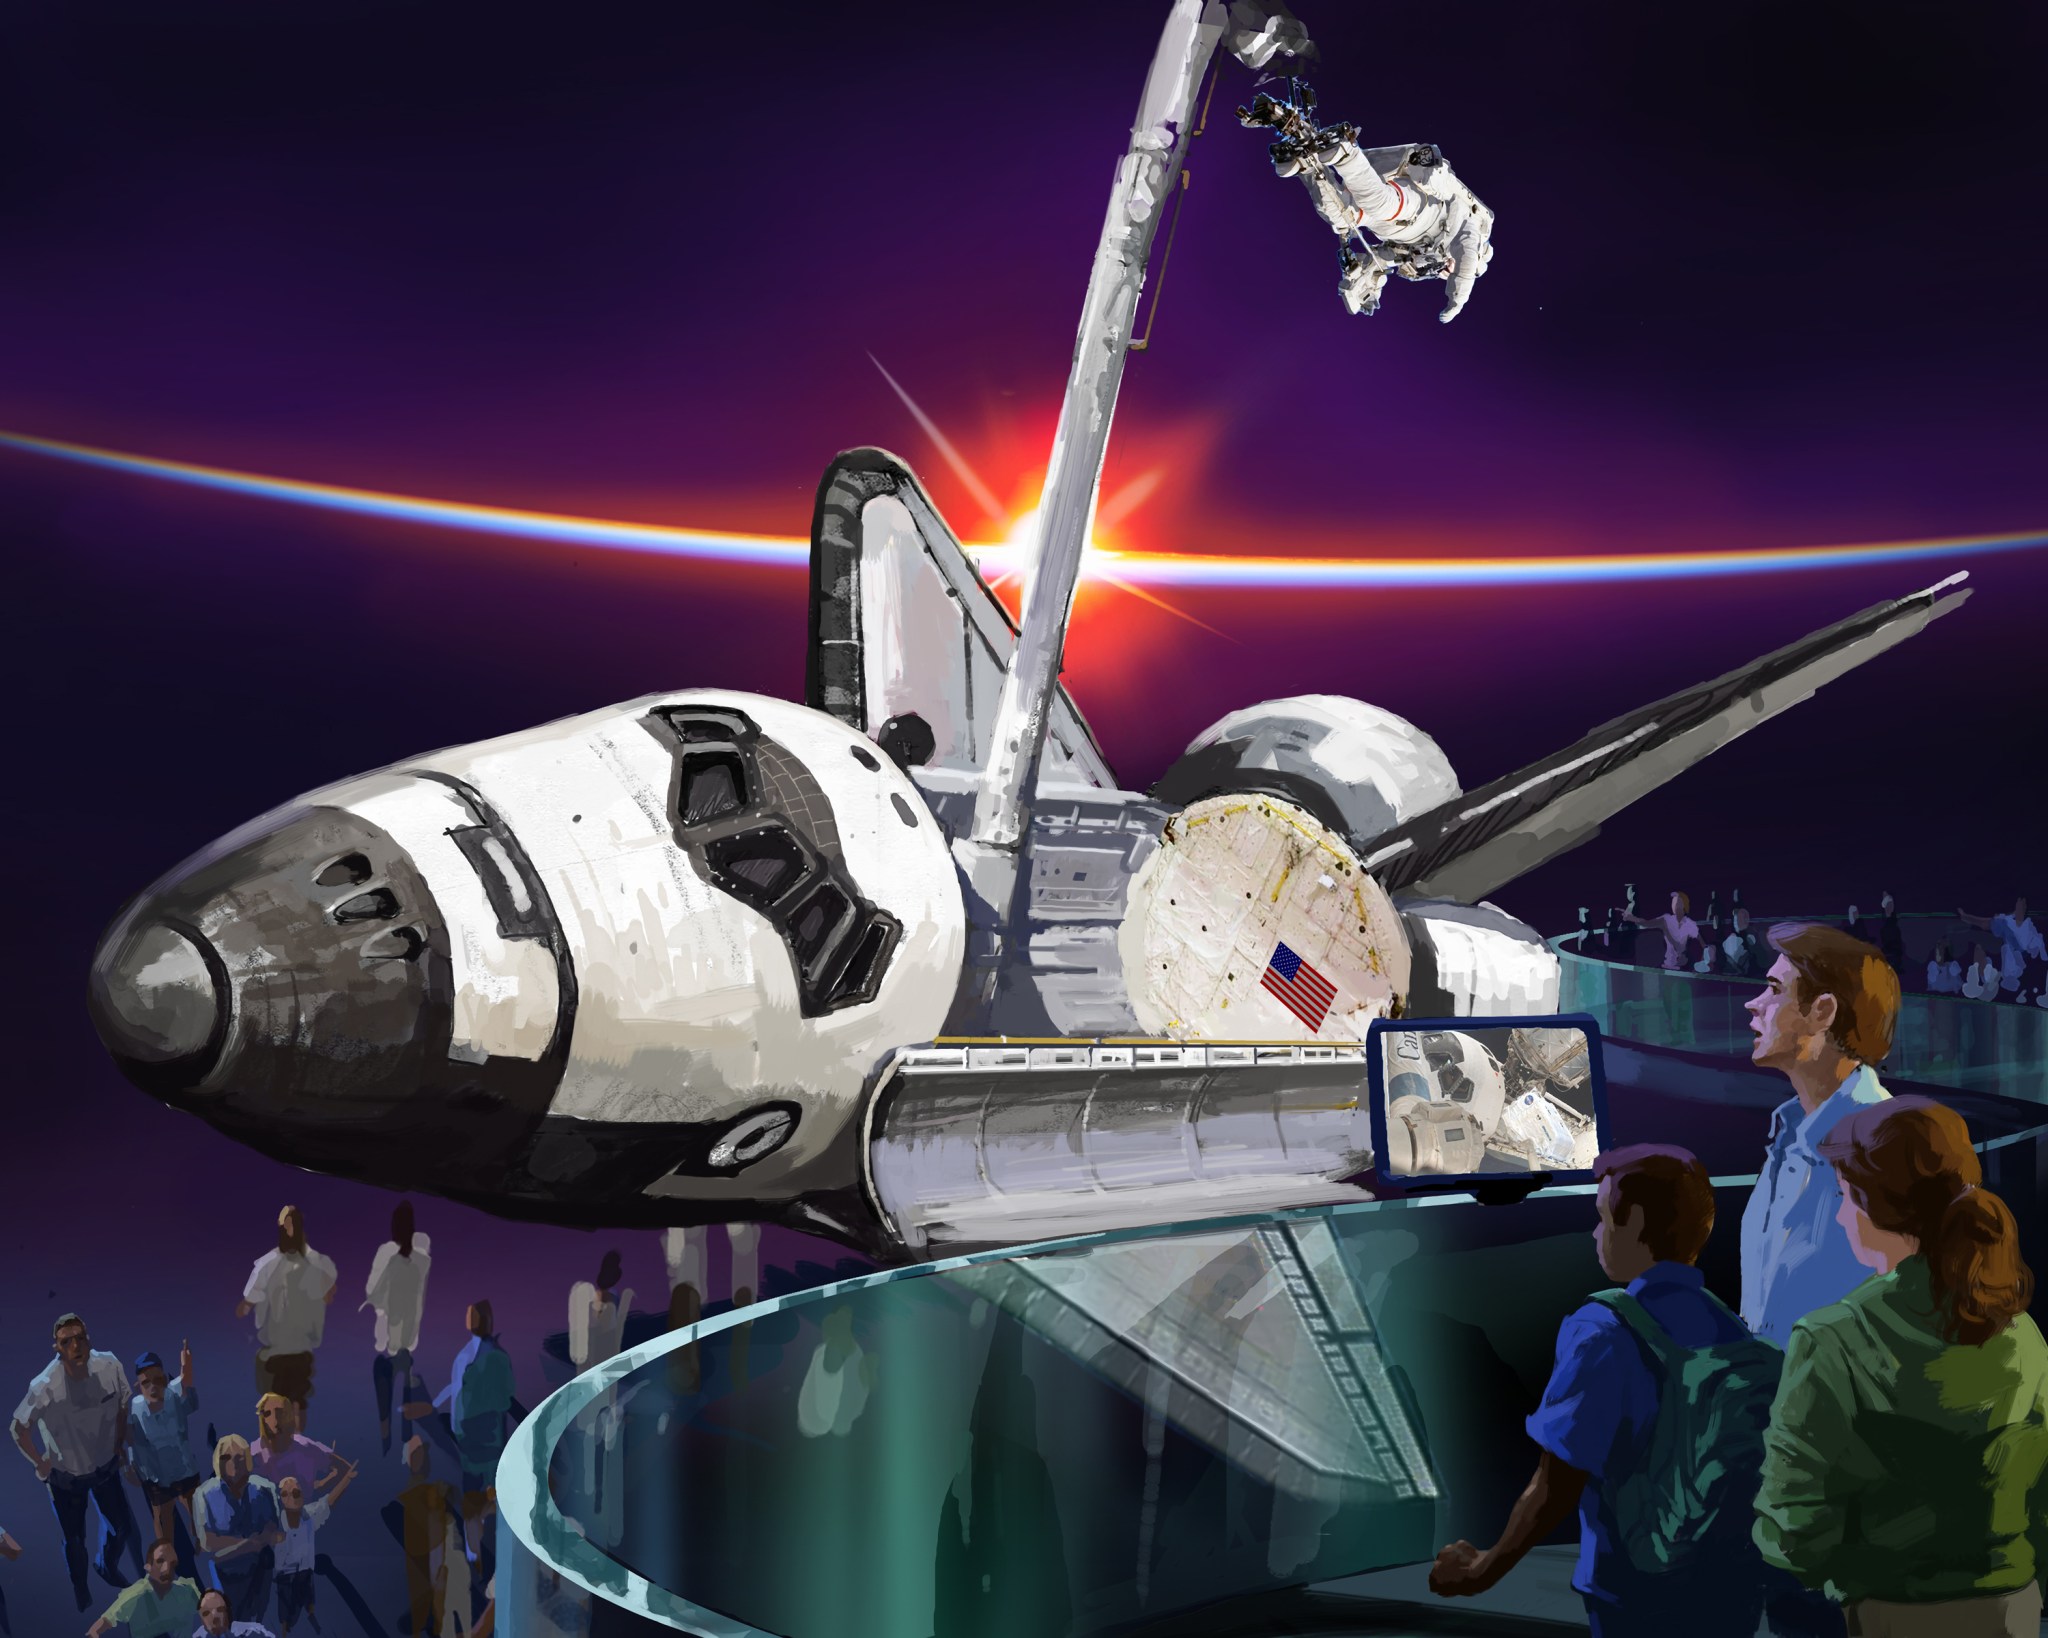 An artist illustration of the Atlantis exhibit at the Kennedy Space Center Visitor Complex.